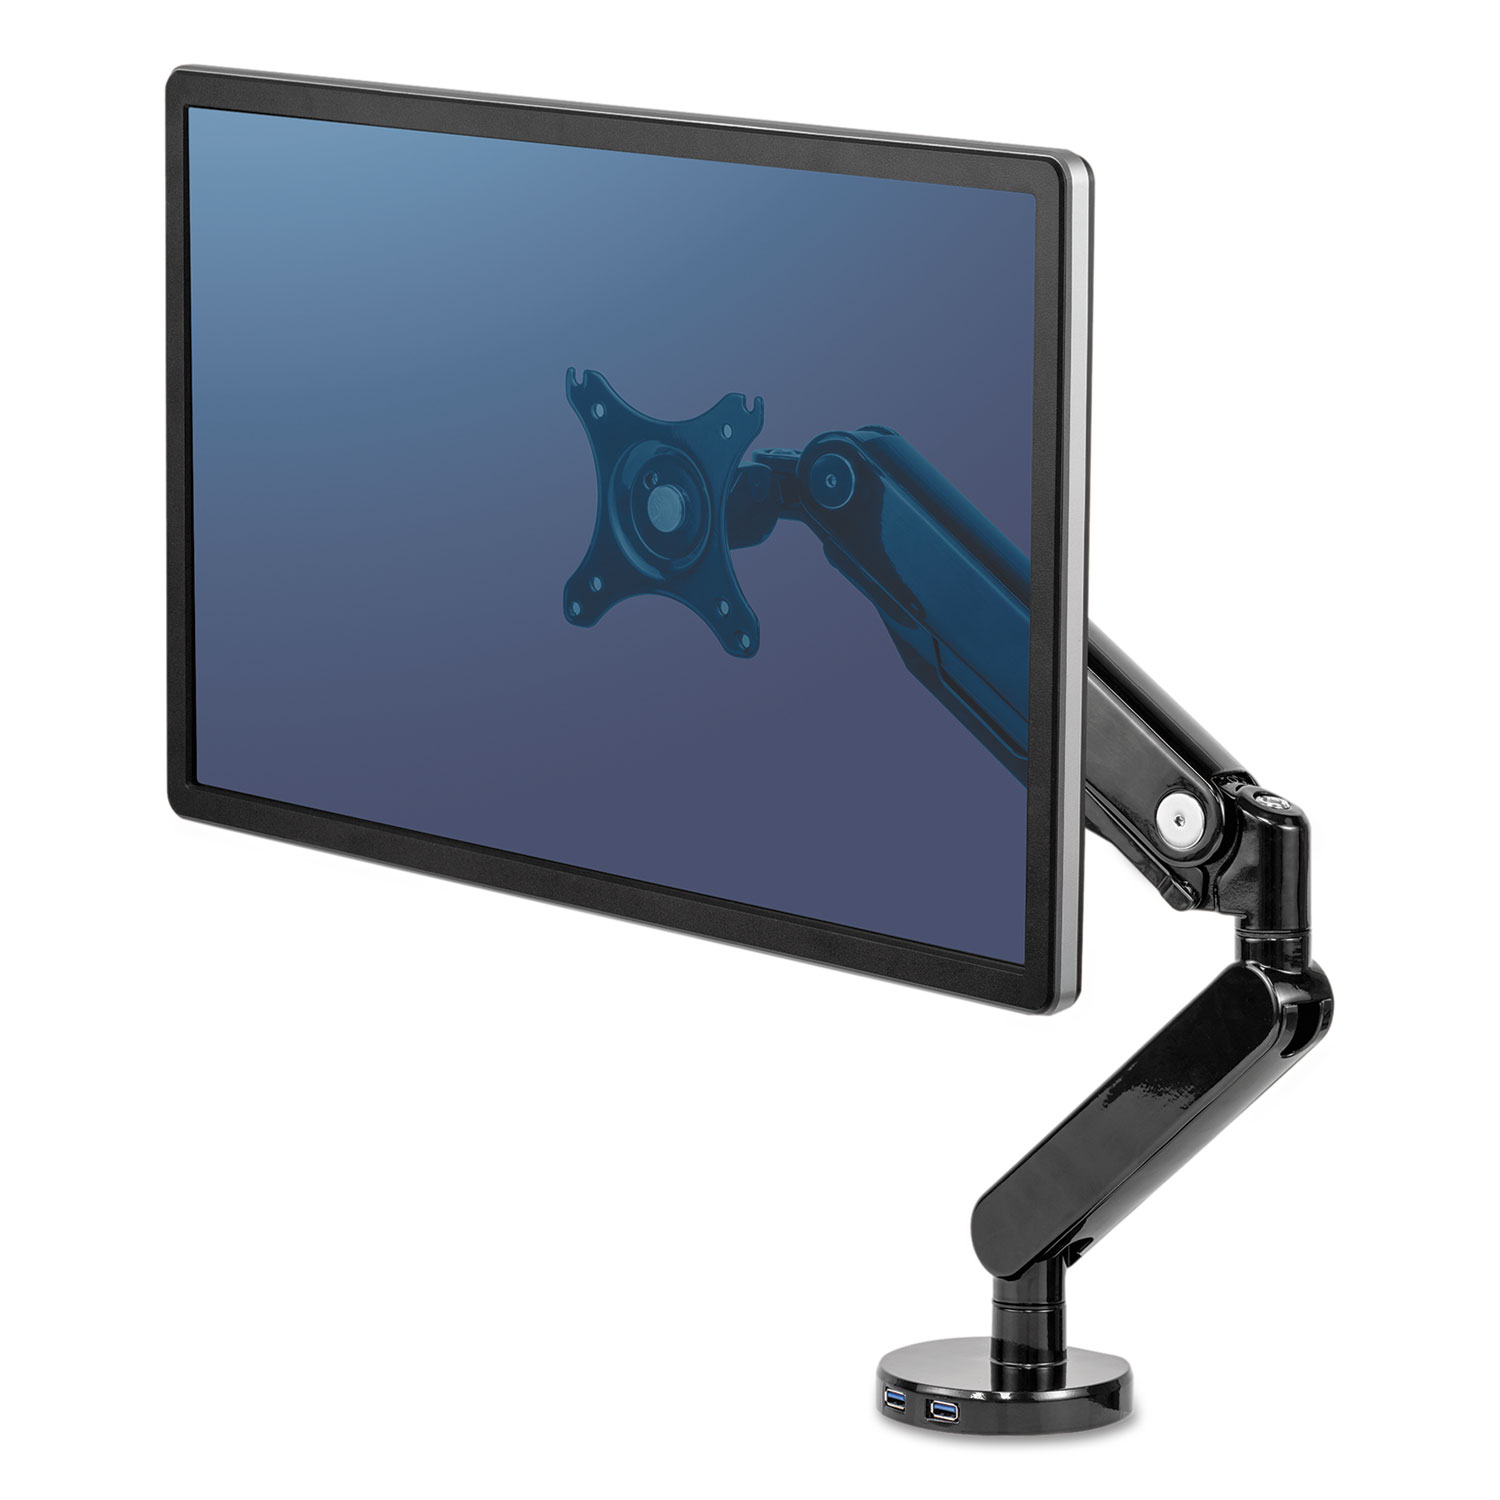  Fellowes 8043301 Platinum Series Single Monitor Arm, up to 30, up to 20 lbs, Clamp/Grommet, Black (FEL8043301) 